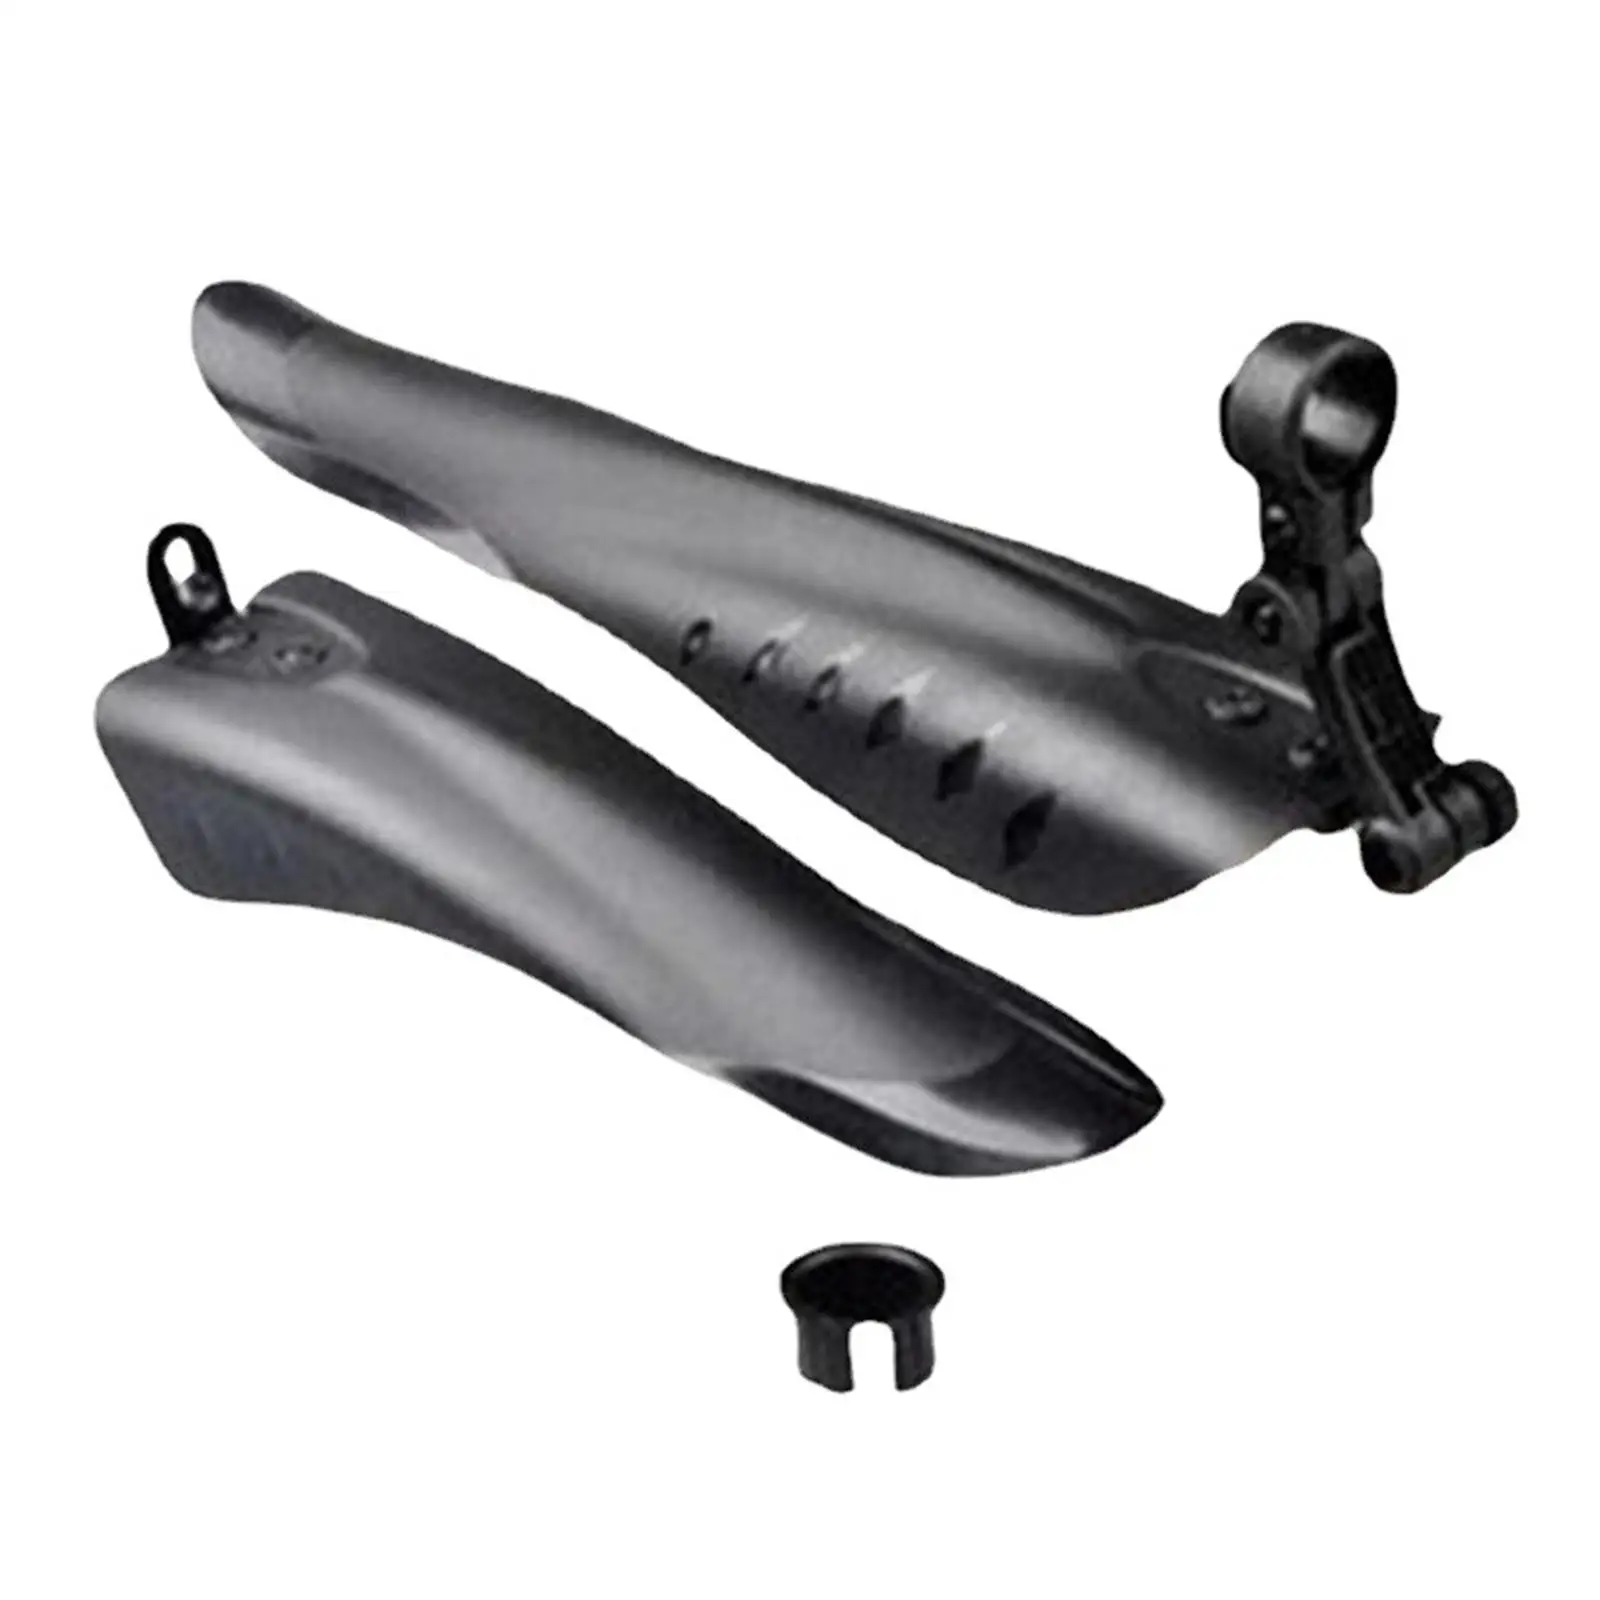 Bike Mudguard Adjustable Parts Thicken Accessories Front Rear Set for Road Bike